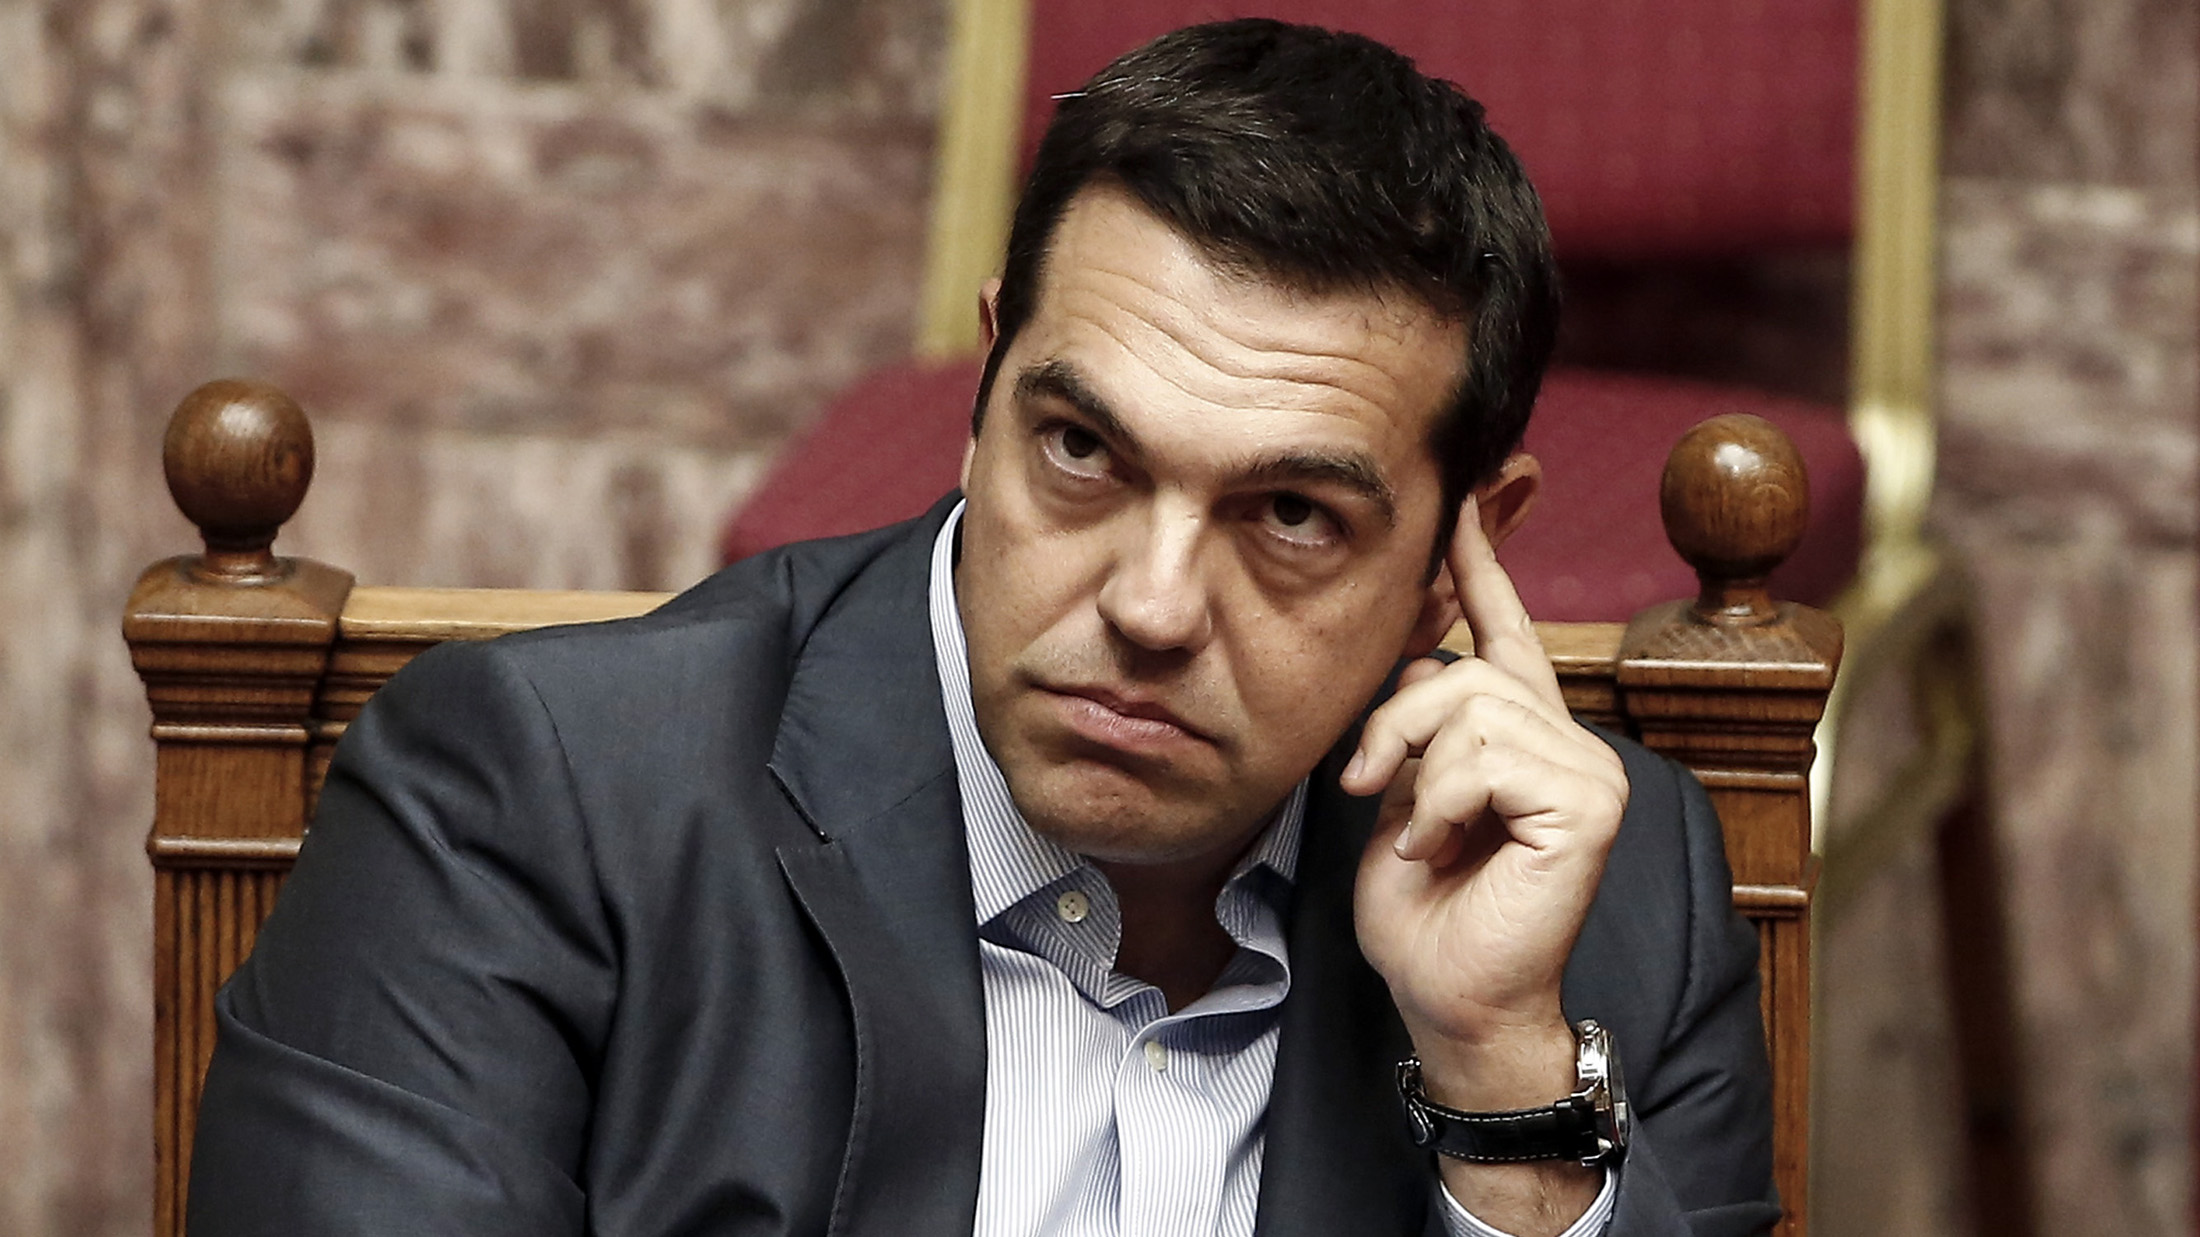 Greek Prime Minister Alexis Tsipras during a vote in parliament in Athens, on Aug. 14.
